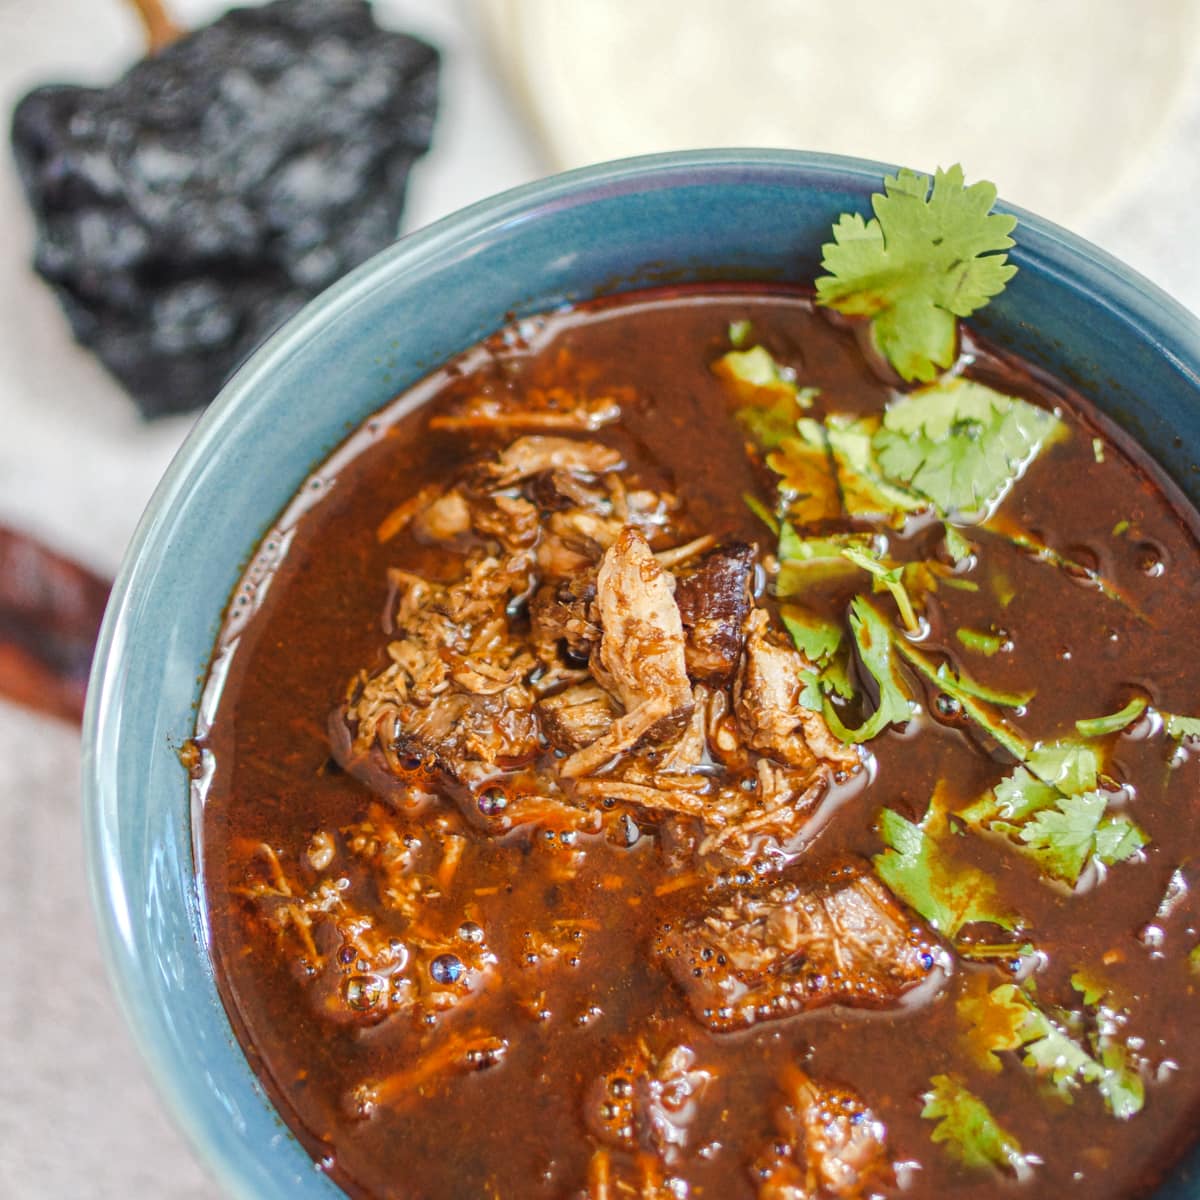 Authentic Mexican birria in a bowl with lamb and homemade consume.